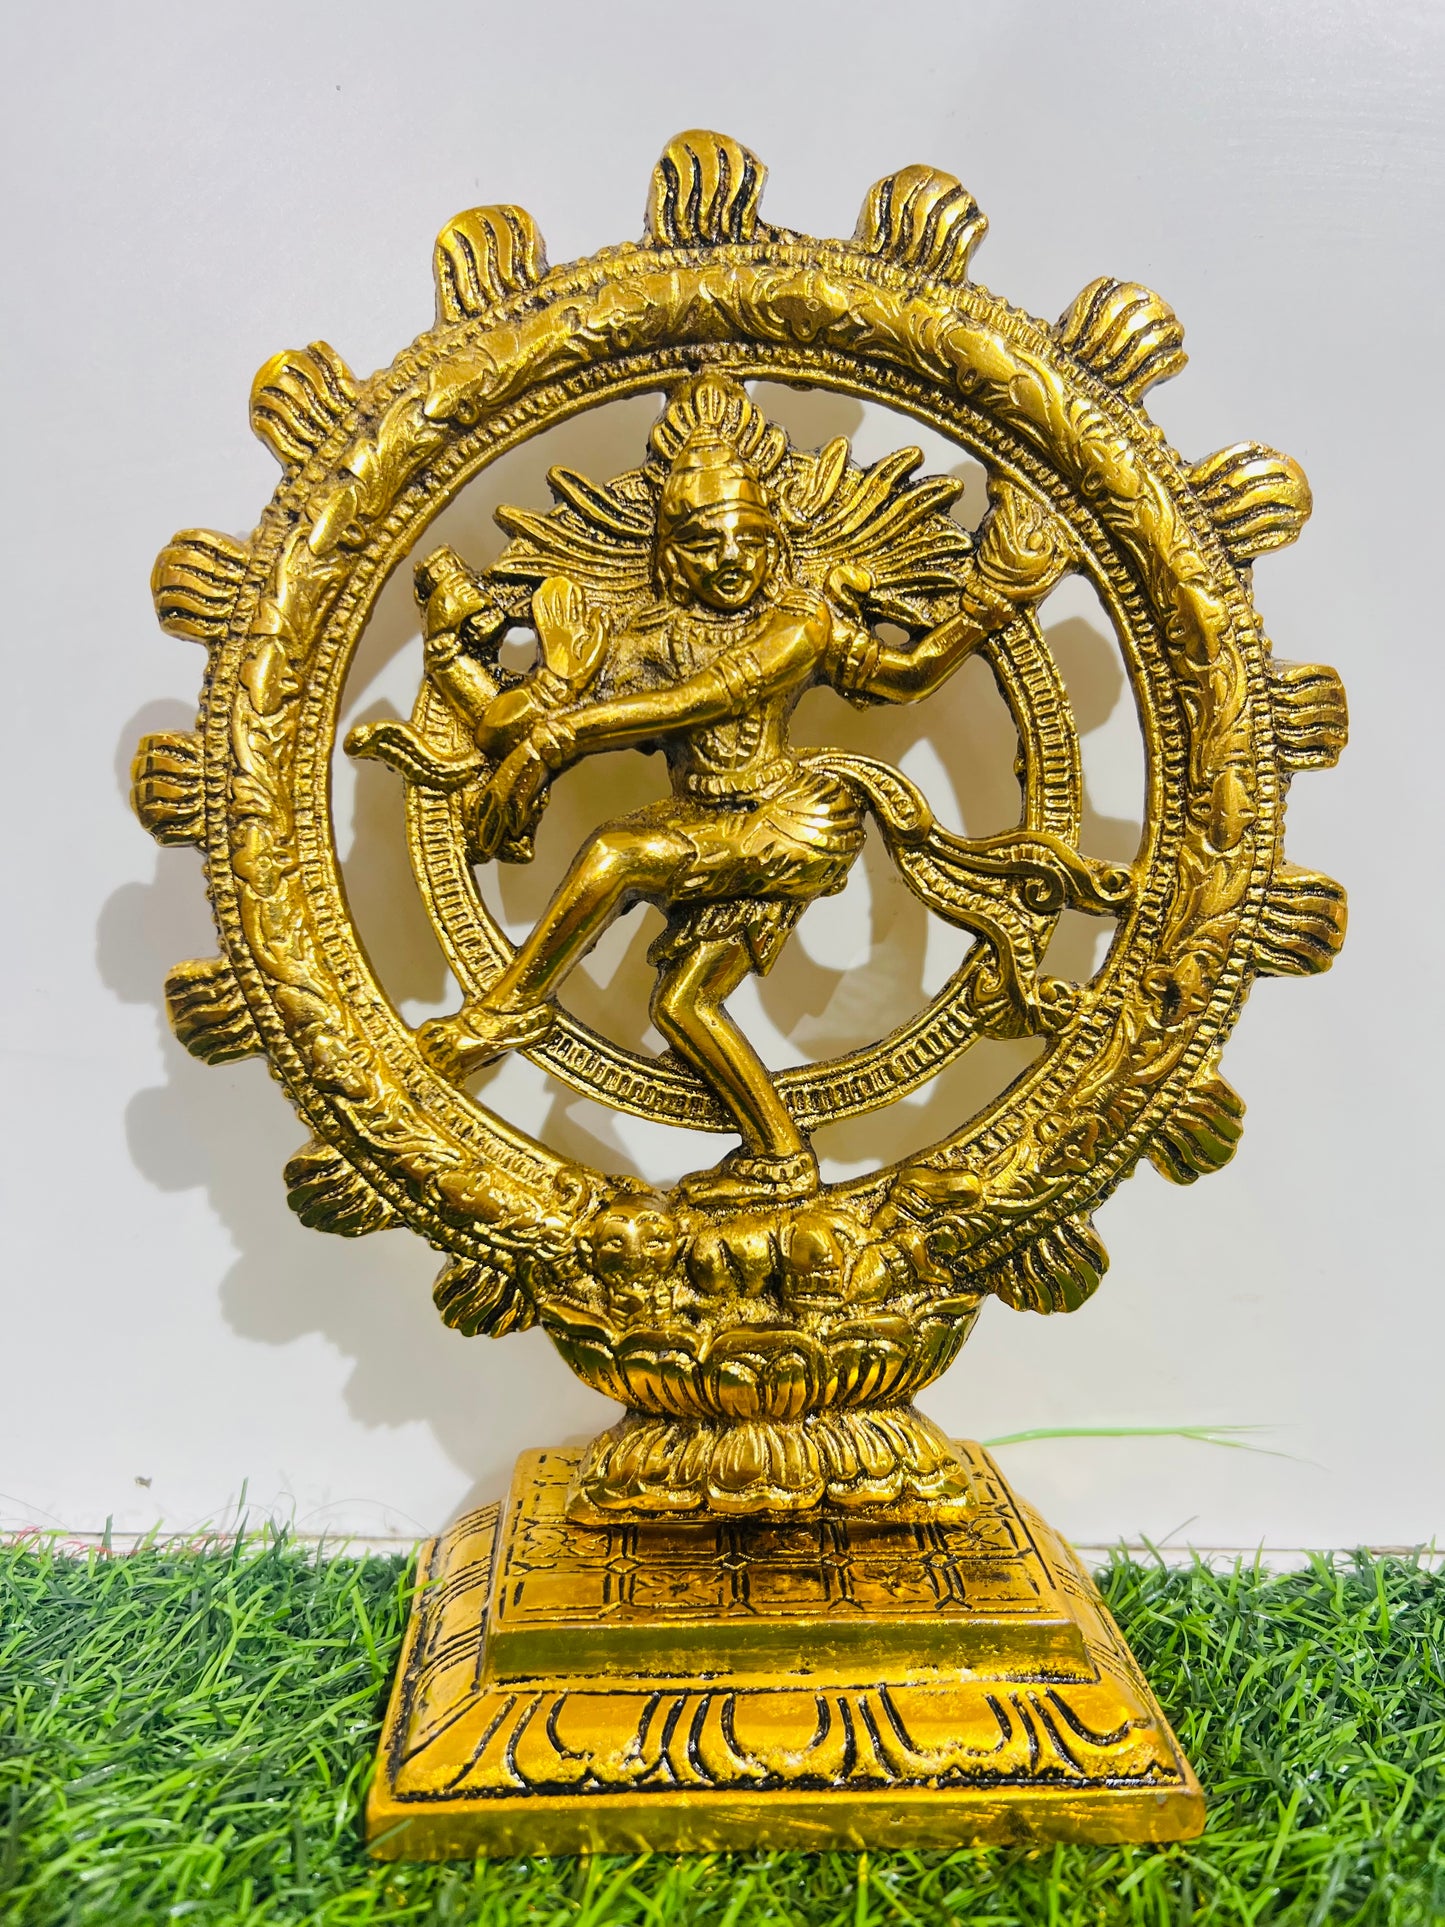 CHANDNI COLLECTION Premium Gold Plated Lord Shiva Dancing Natraj Statue Showpiece Handcrafted Sculpture for Home and Puja Decor| nataraj Statue for Home|